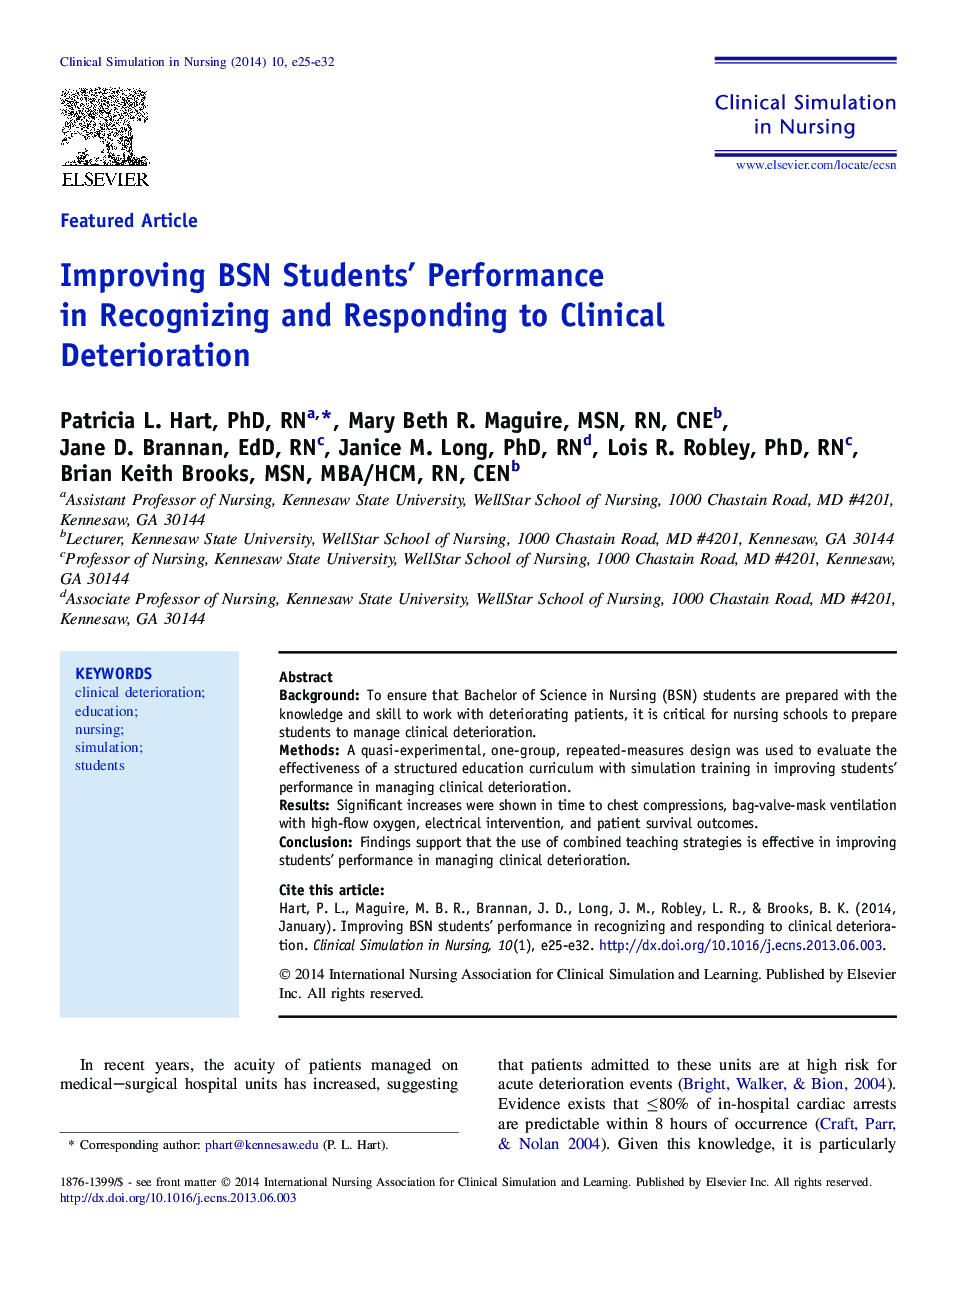 Improving BSN Students' Performance in Recognizing and Responding to Clinical Deterioration